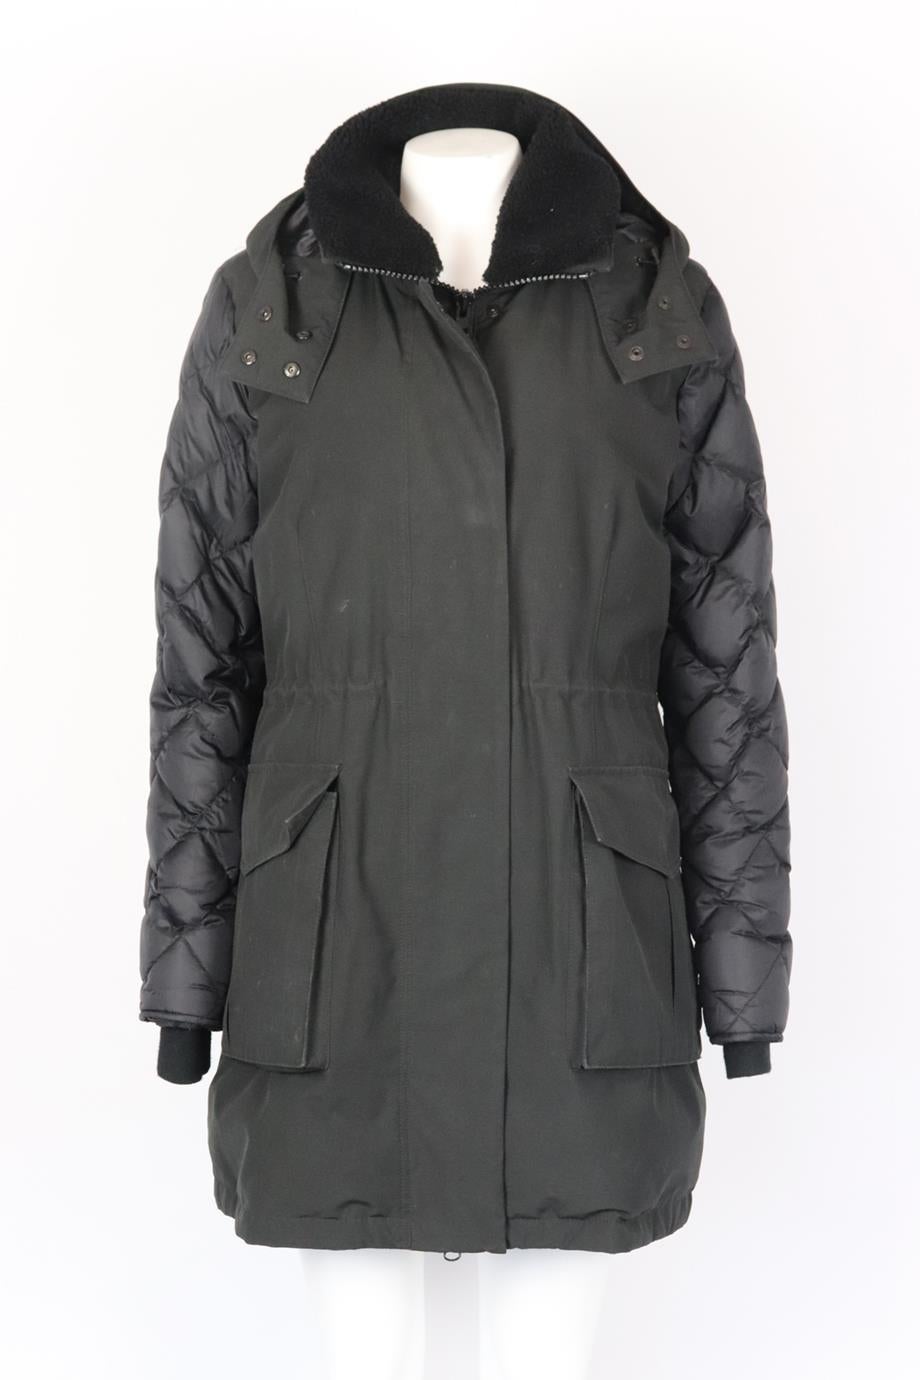 Canada Goose hooded quilted shell down coat. Black. Long sleeve, mock neck. Zip fastening at front. 85% Polyester, 15% cotton; fabric2: 100% nylon; lining: 100% polyester: filling: 80% down, 20% feather padding: 100% polyester. Size: XLarge (UK 14,